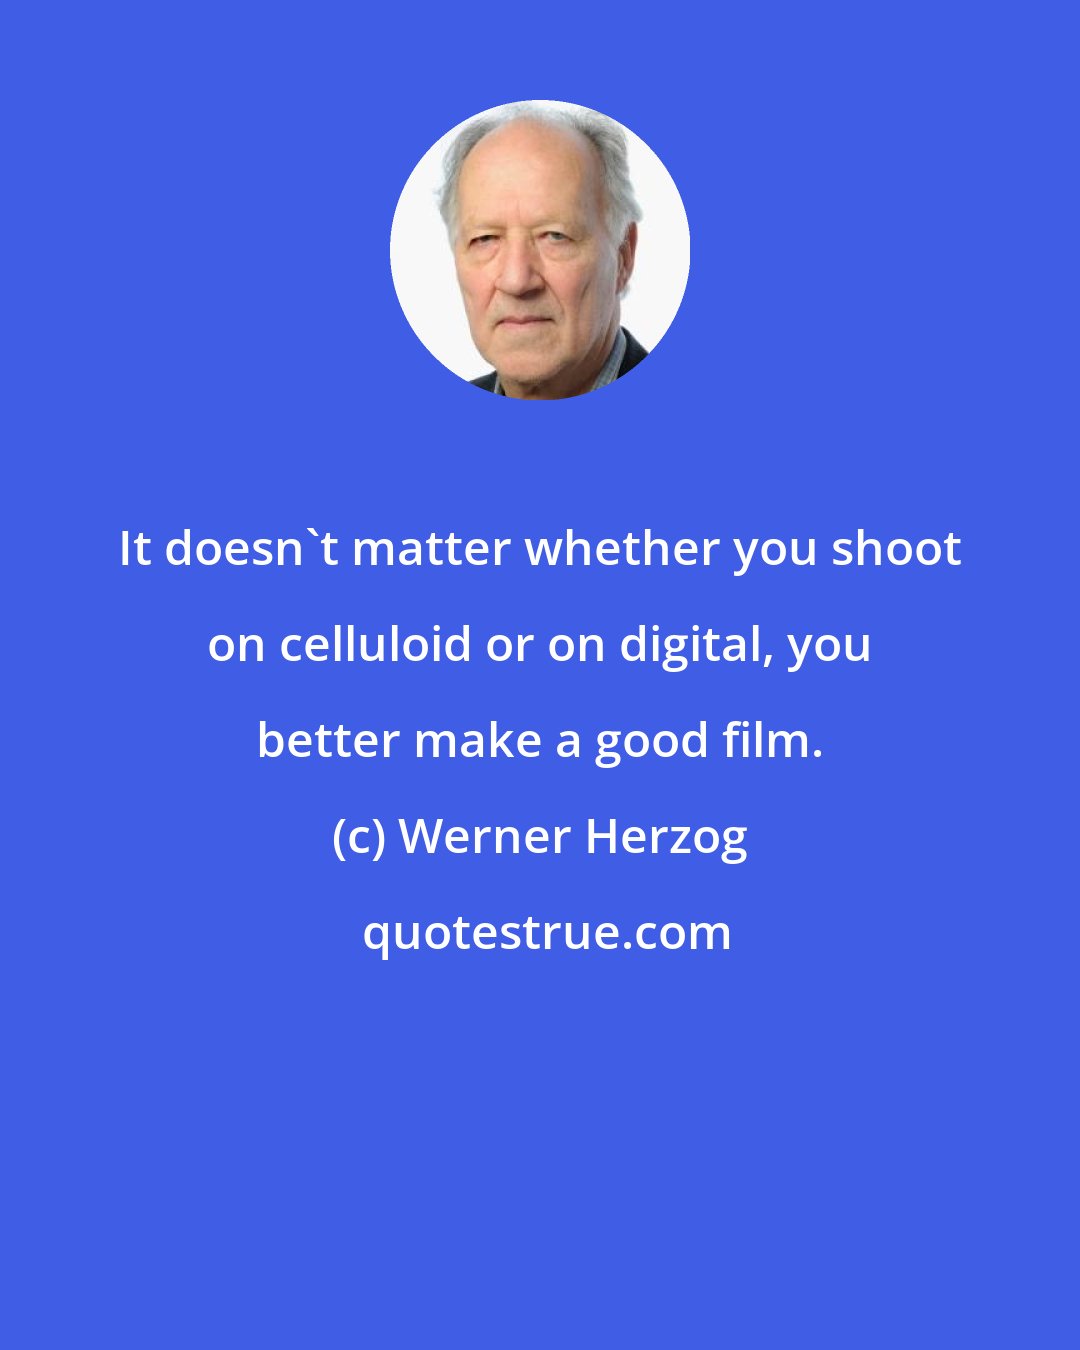 Werner Herzog: It doesn't matter whether you shoot on celluloid or on digital, you better make a good film.